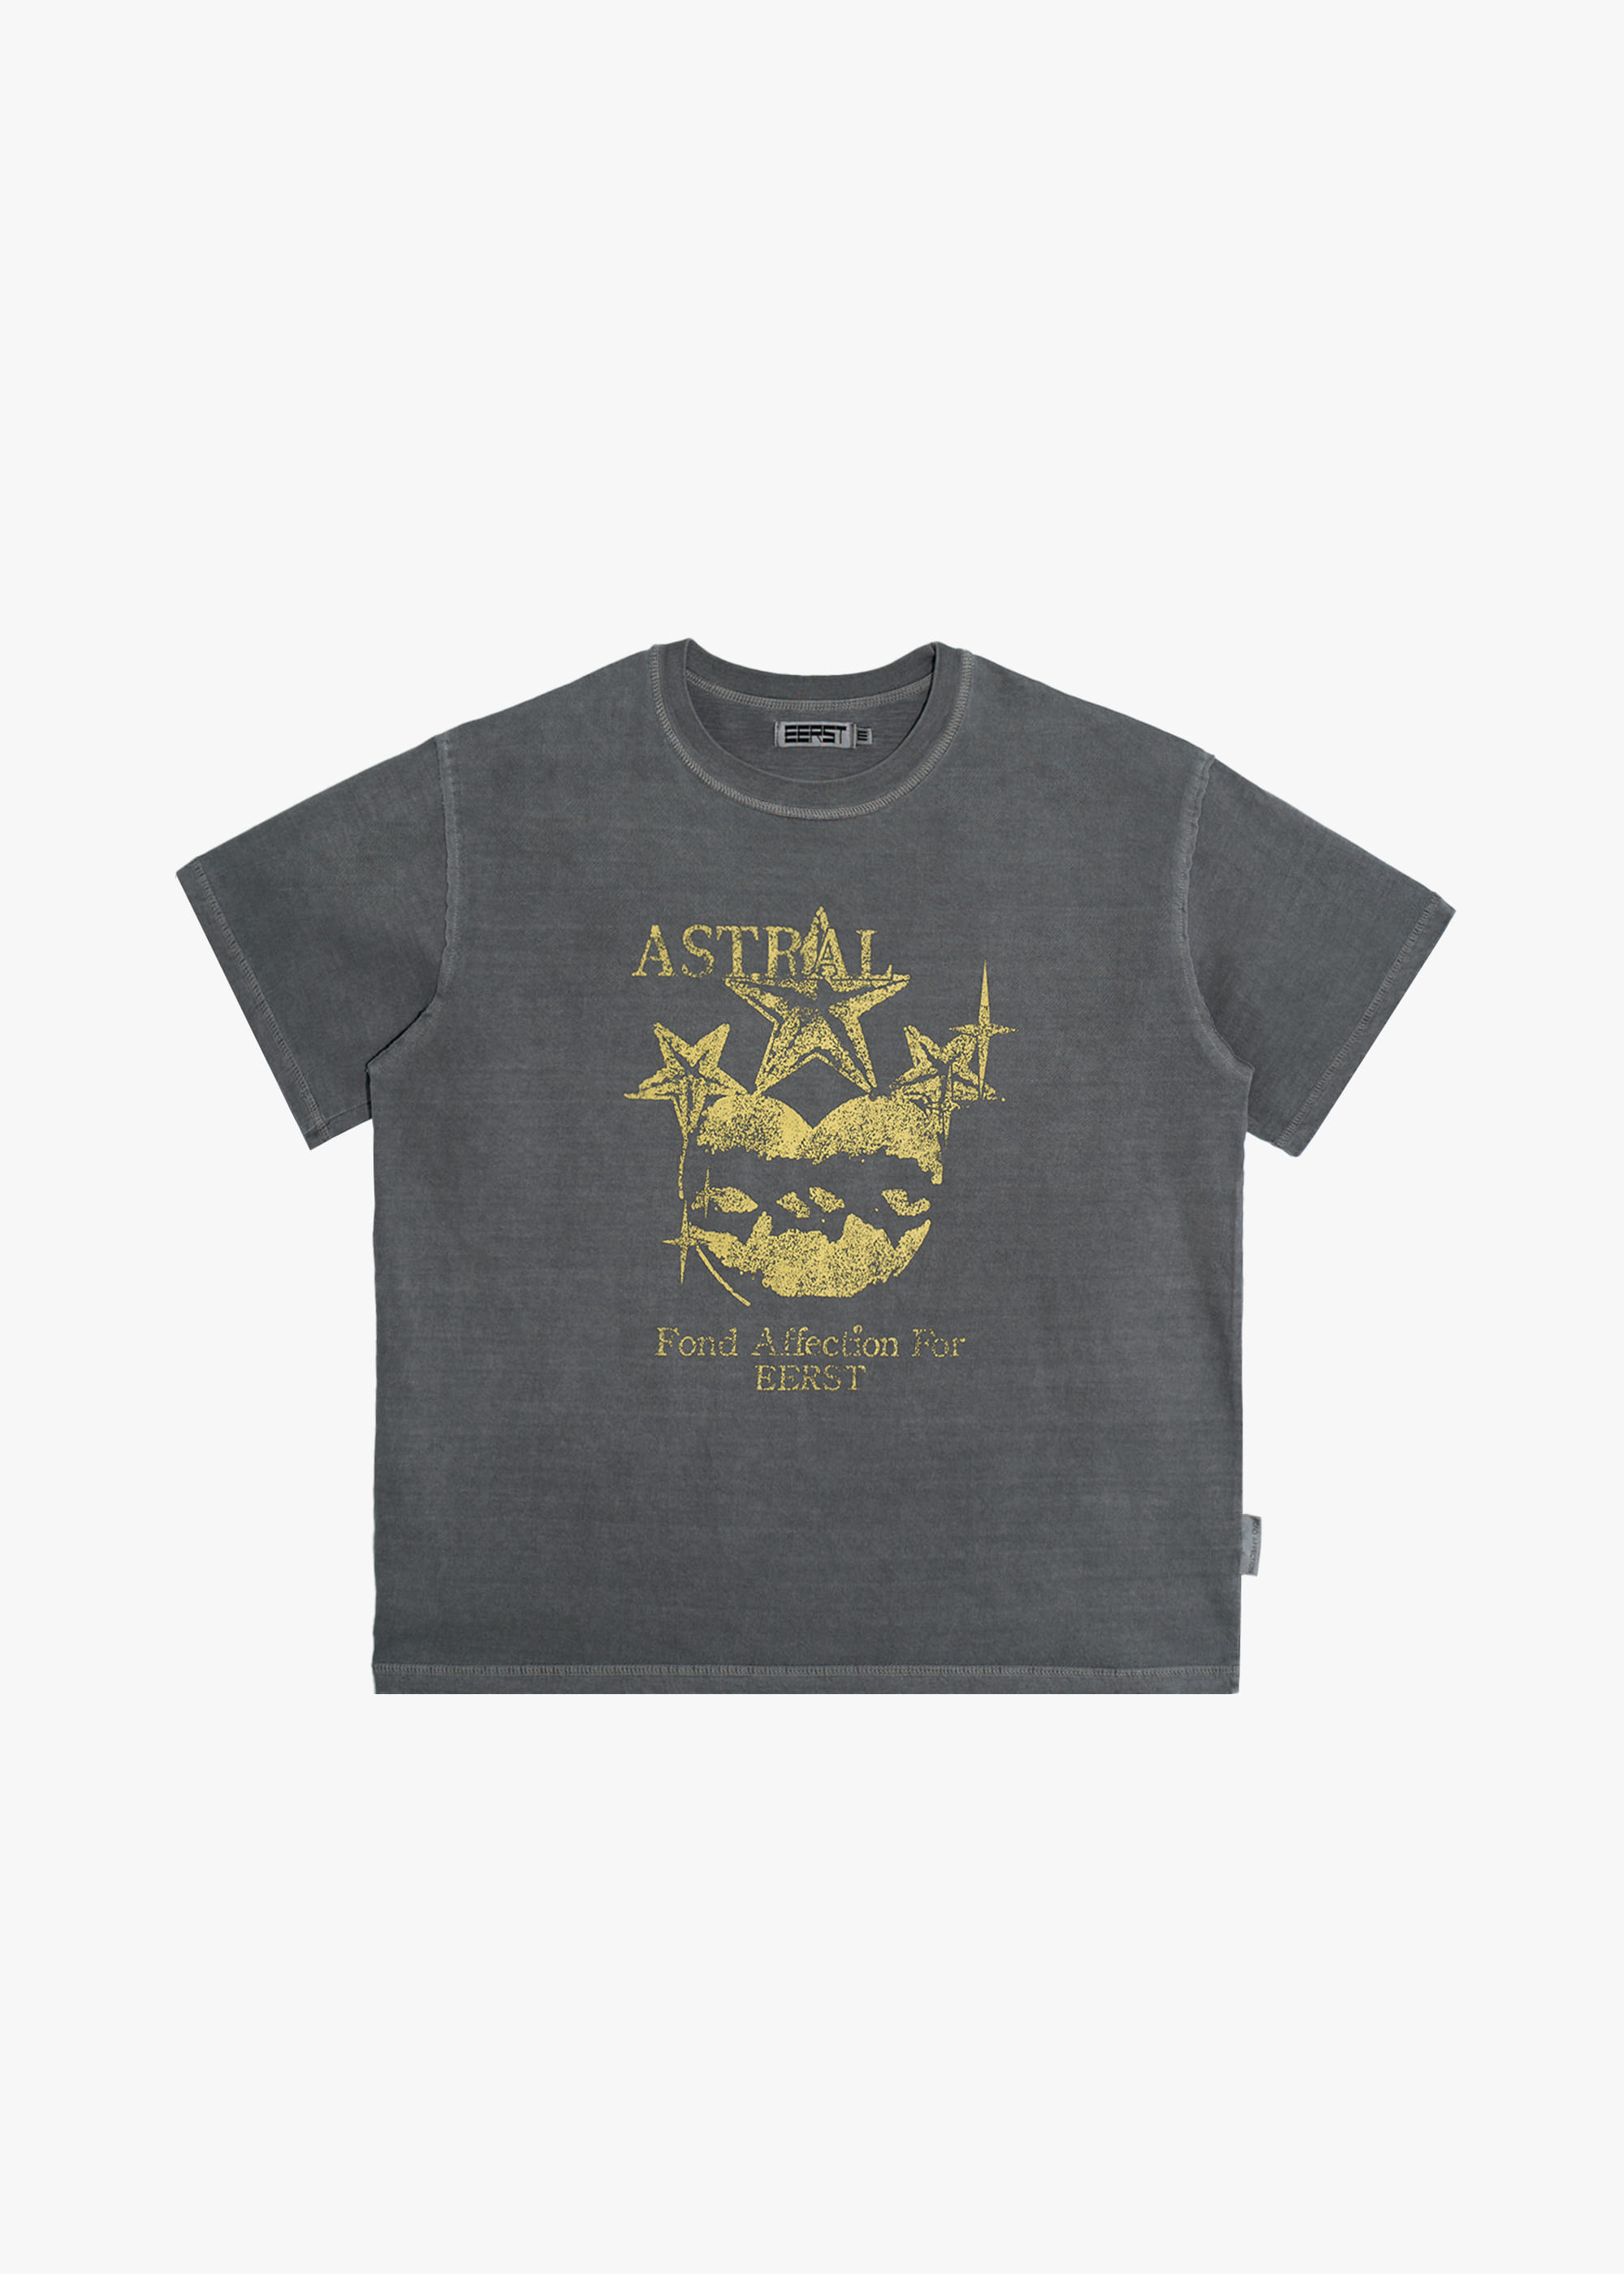 Astral T-shirt [Washed Charcoal] (6/7 예약배송)